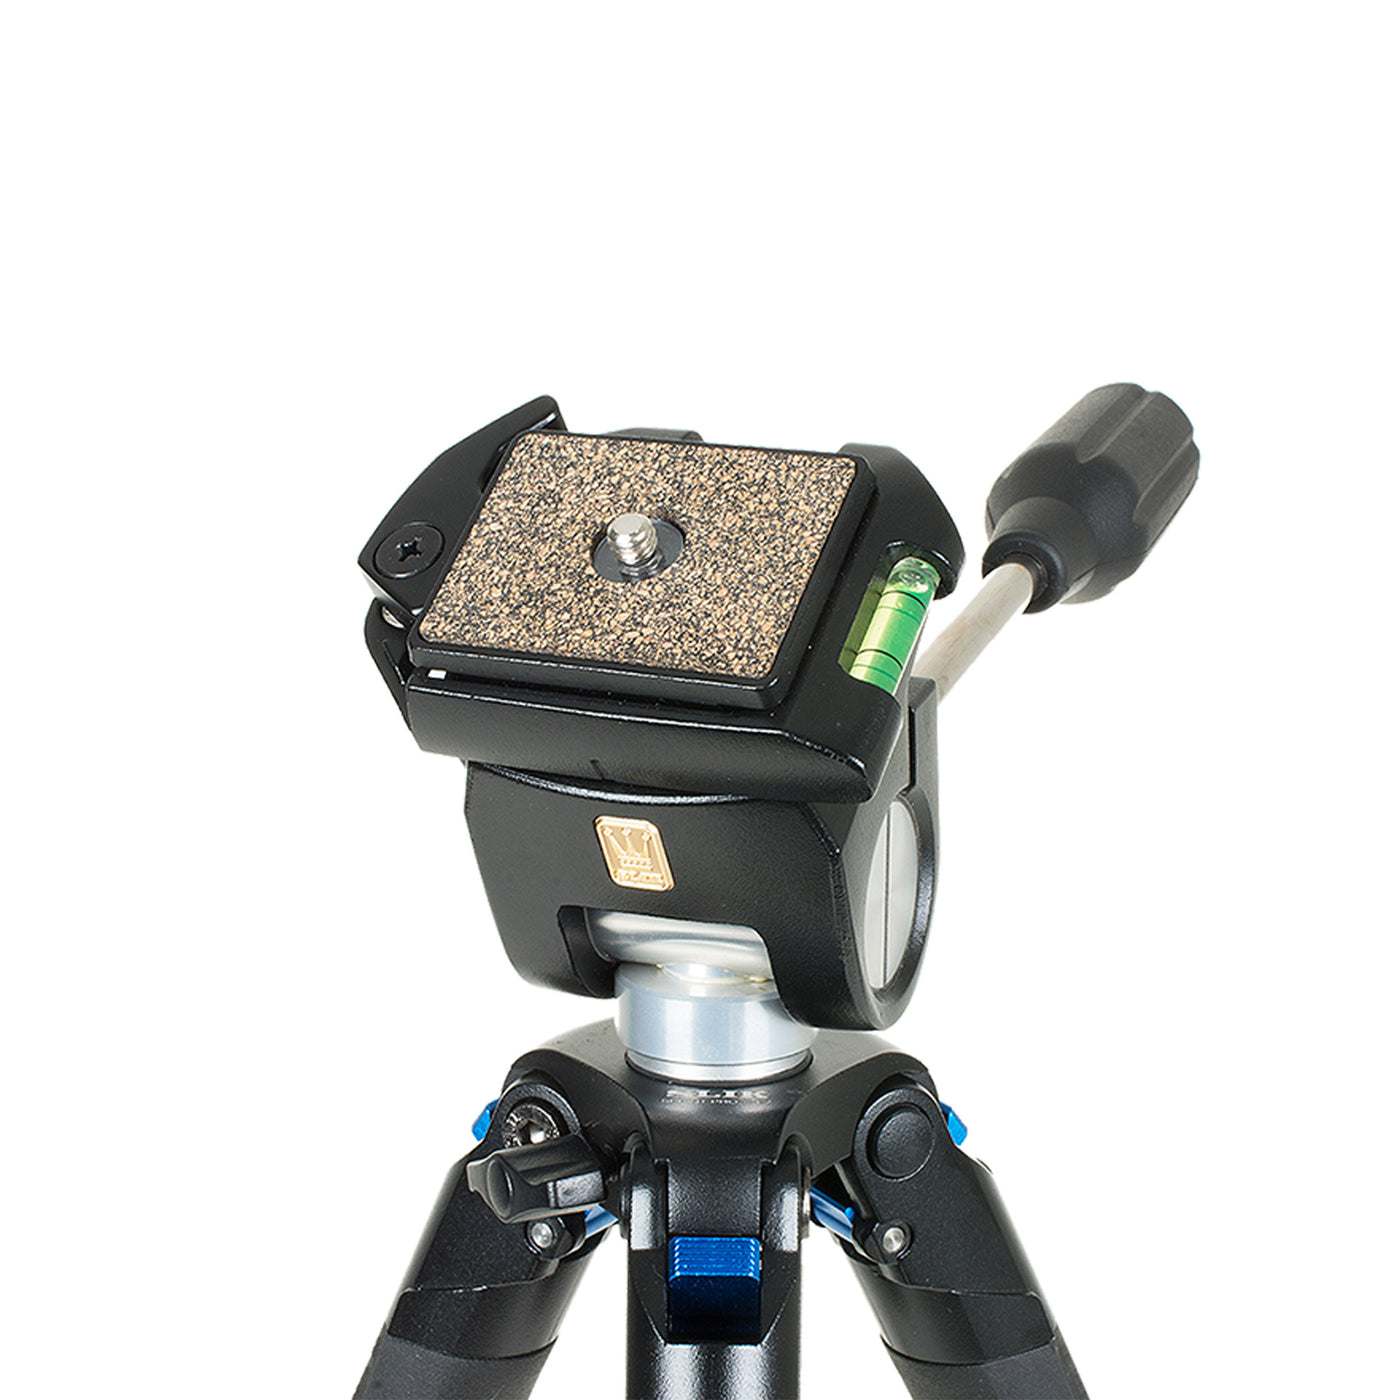 Tripod head that is included with the tripod